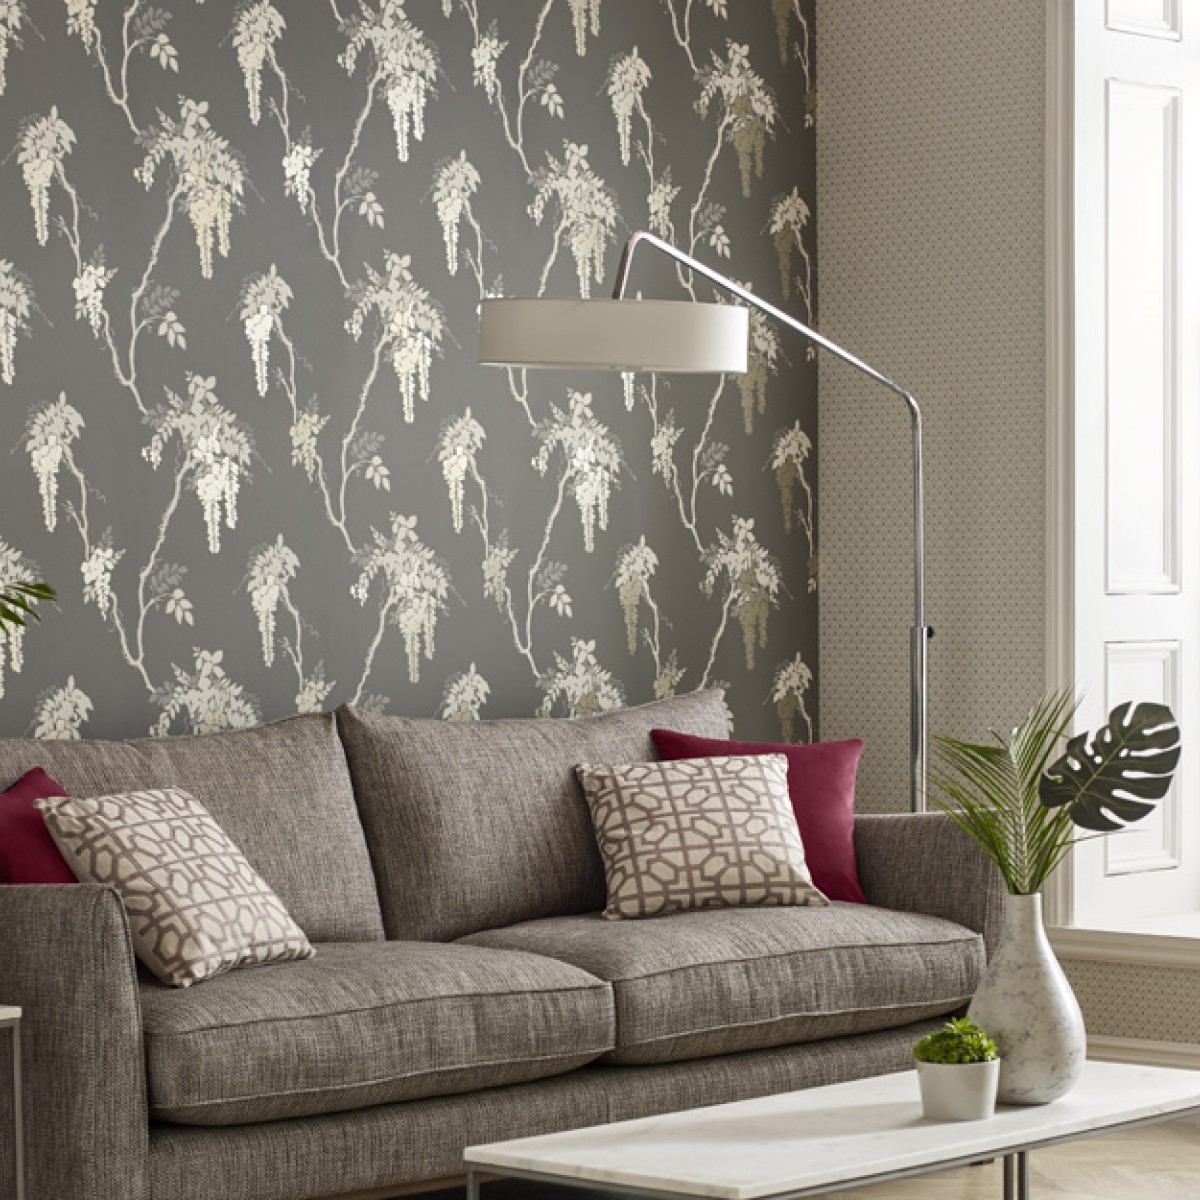 Tapet Leonora, Grey Luxury Floral, 1838 Wallcoverings, 5.3mp / rola, Tapet living 